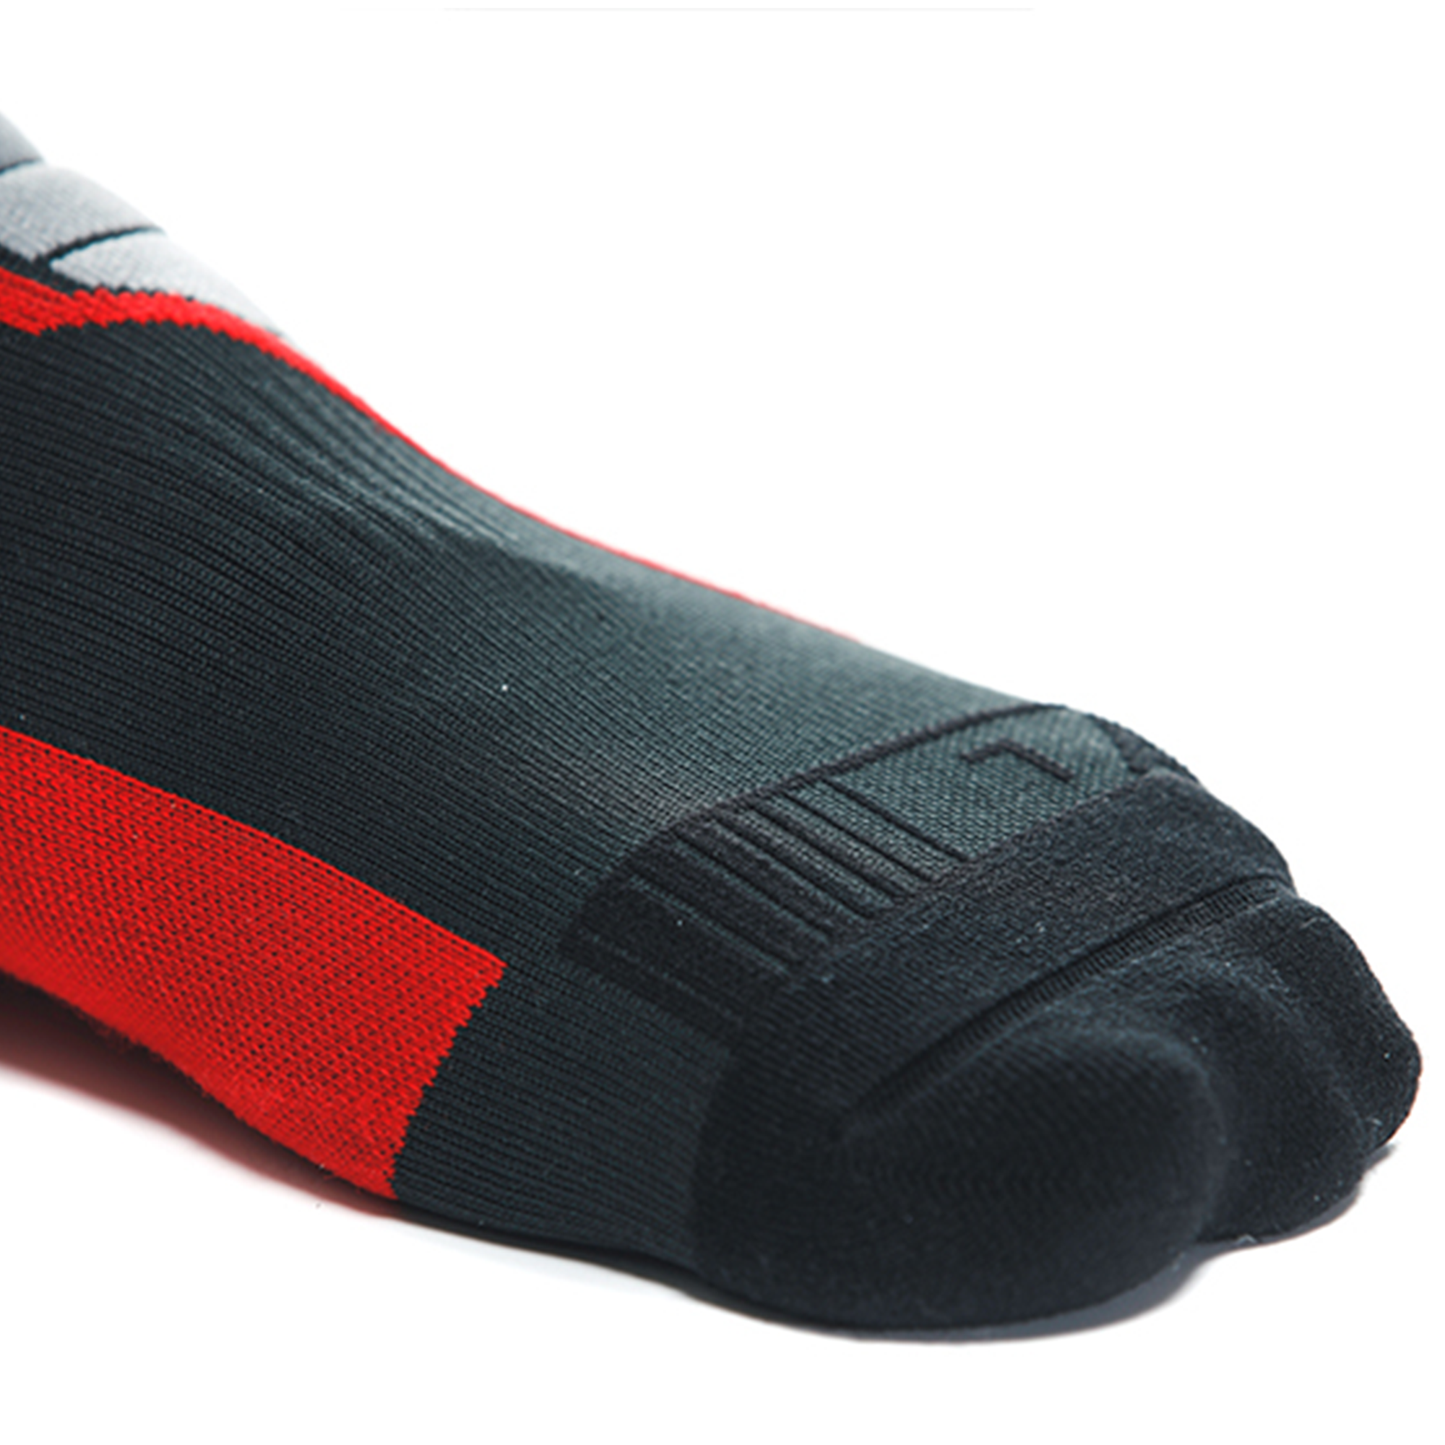 Dainese Thermo Long Socks - Black/Red (606)